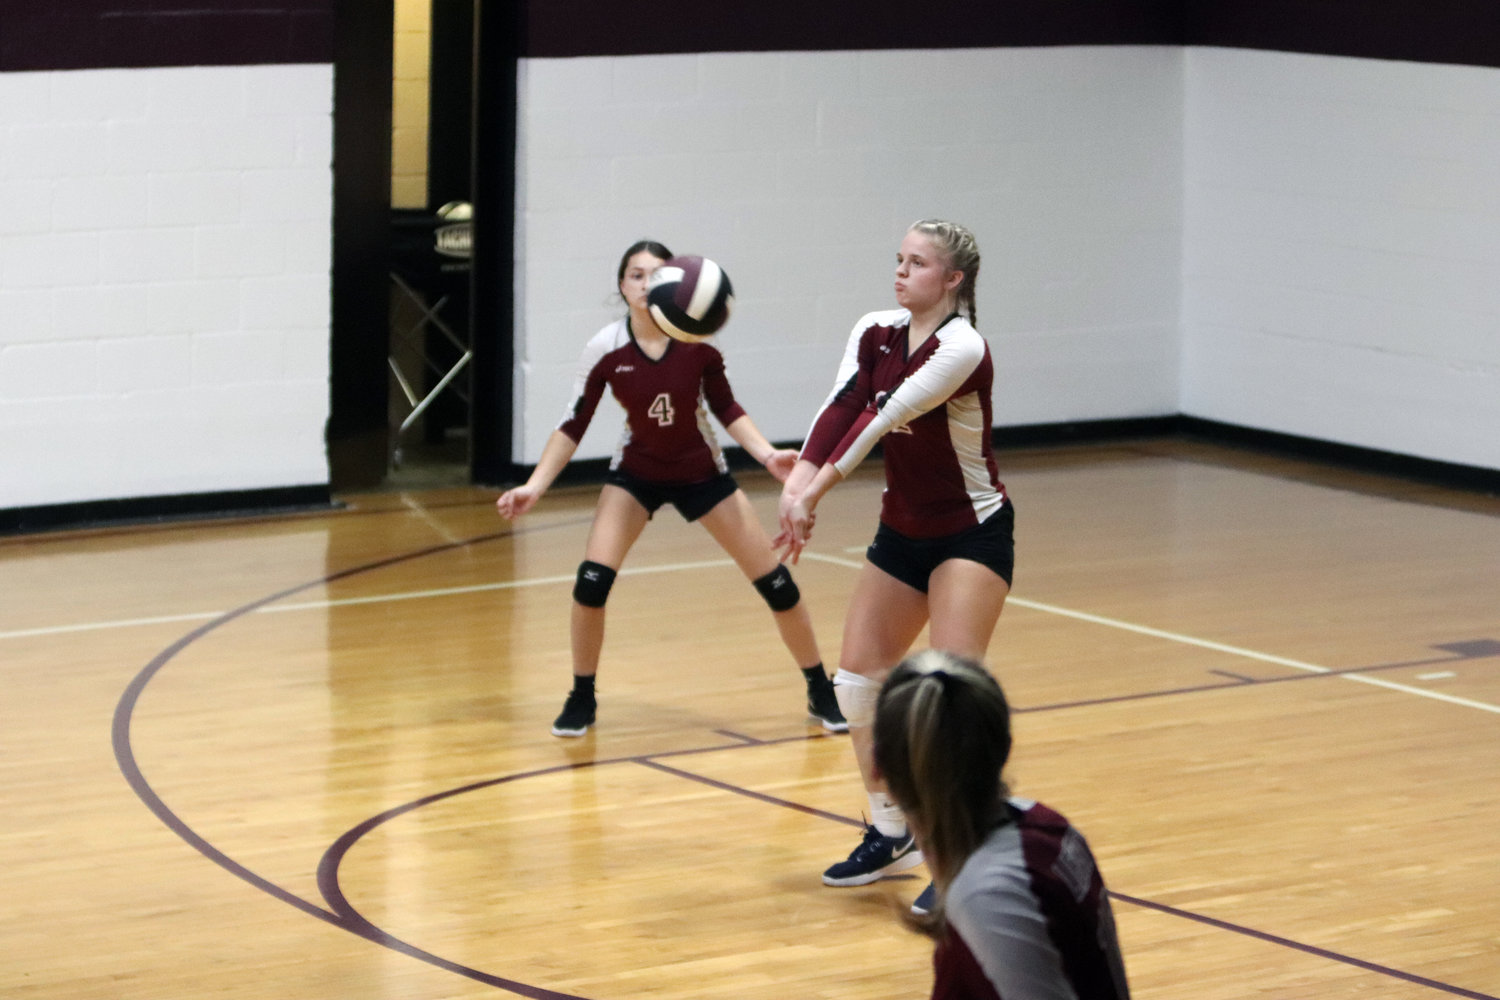 Alli Meyer (middle) prepares to pass the ball during Tuesday’s win over Eagle Ridge Christian.